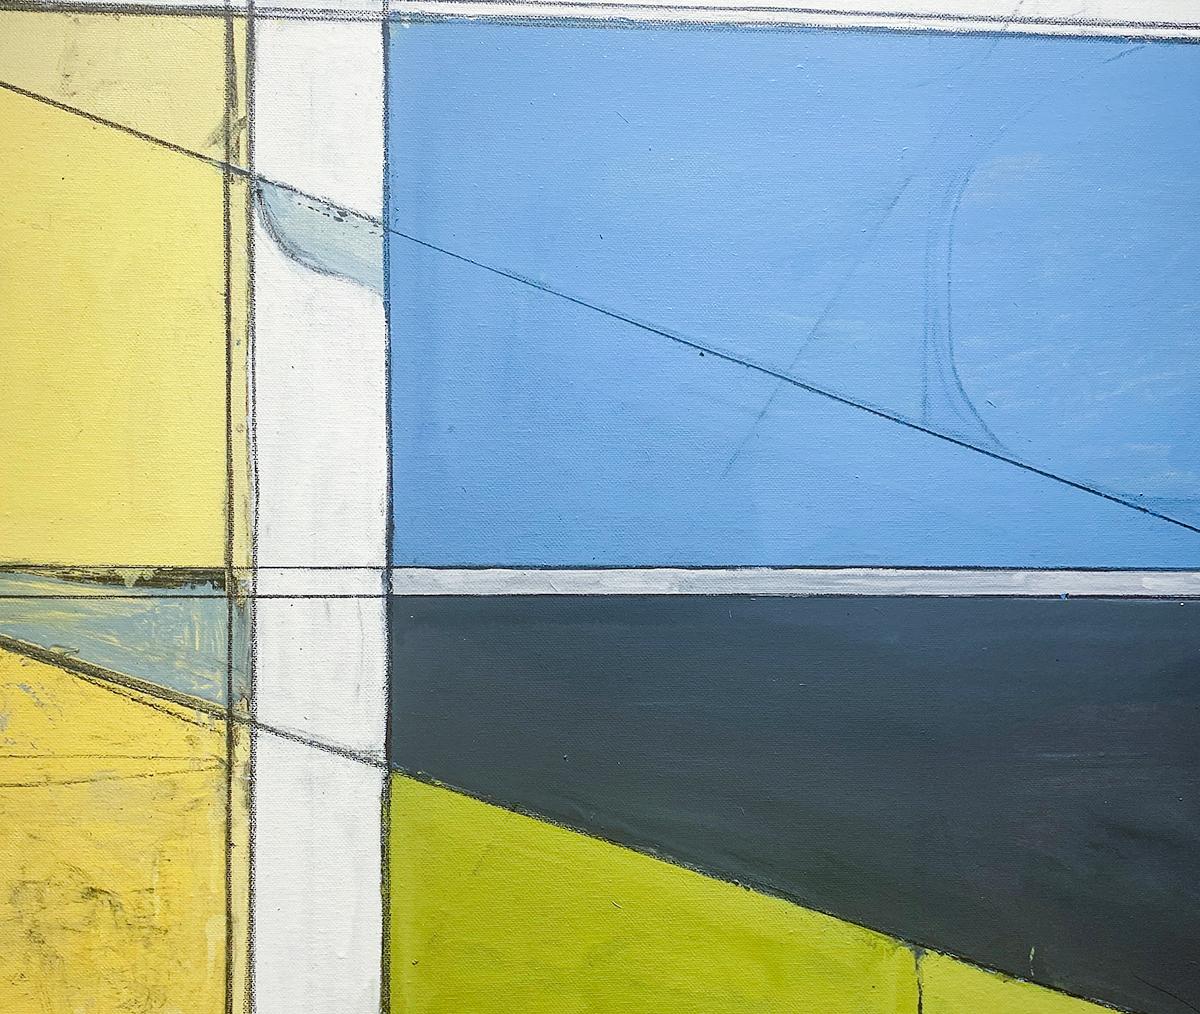 Abstract Geometric oil painting on canvas in bright yellow, sky blue, and white - inspired by abstract expressionist Richard Diebenkorn
